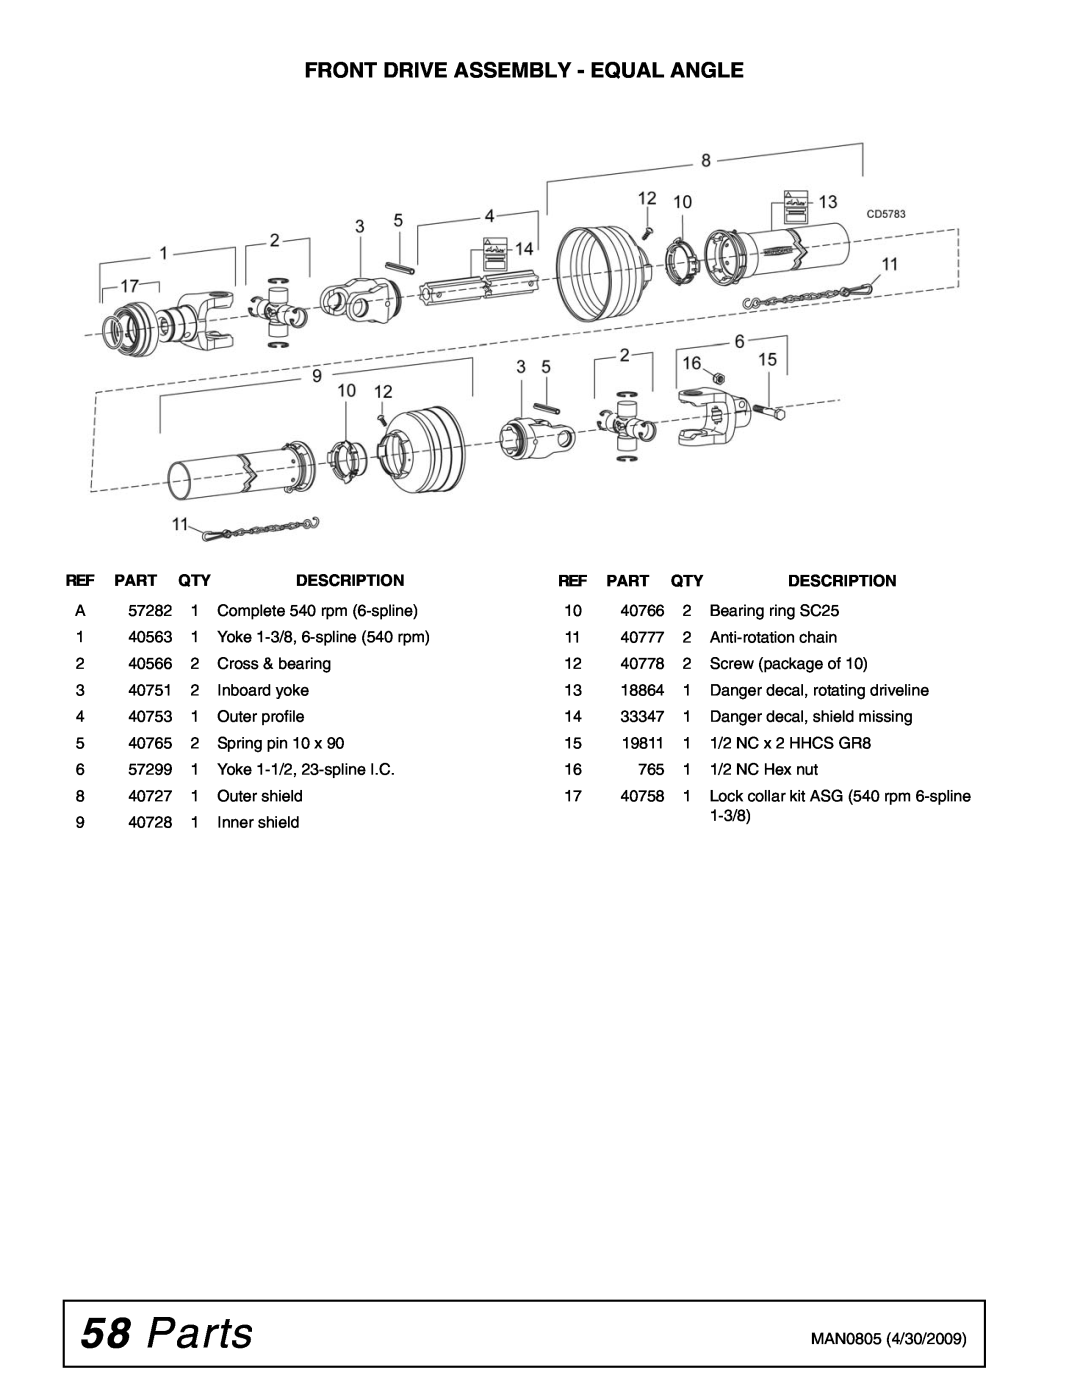 Woods Equipment BW180HBQ, BW126HBQ manual Parts, Front Drive Assembly - Equal Angle, Description 